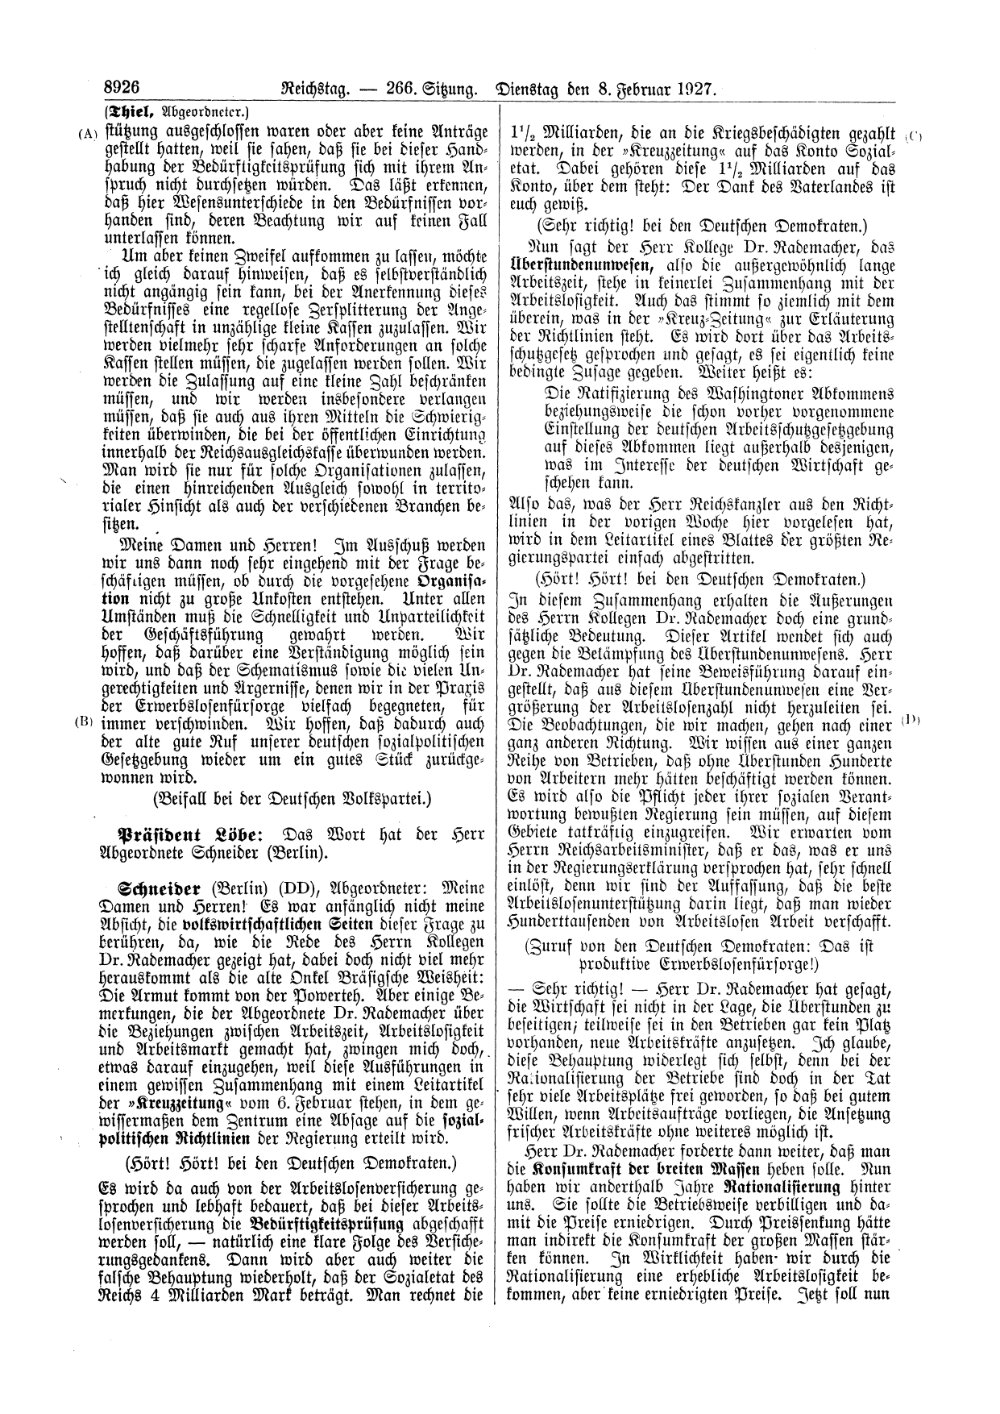 Scan of page 8926